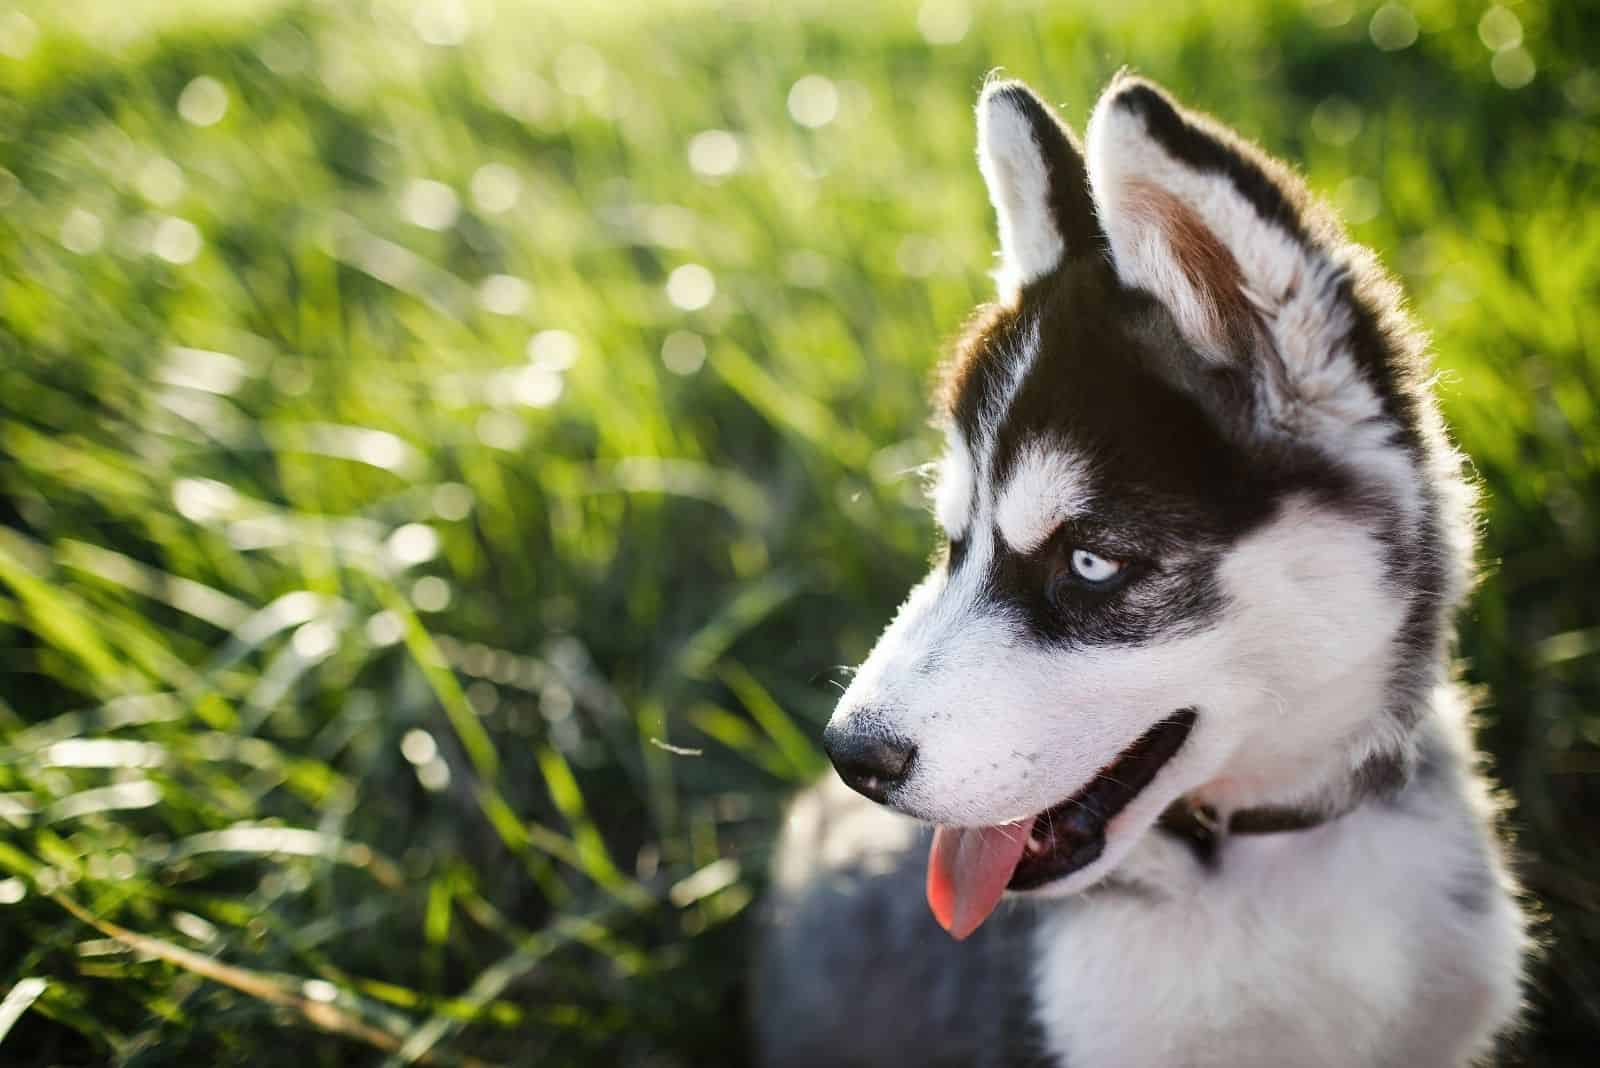 siberian husky dog small and cute standing outdoors